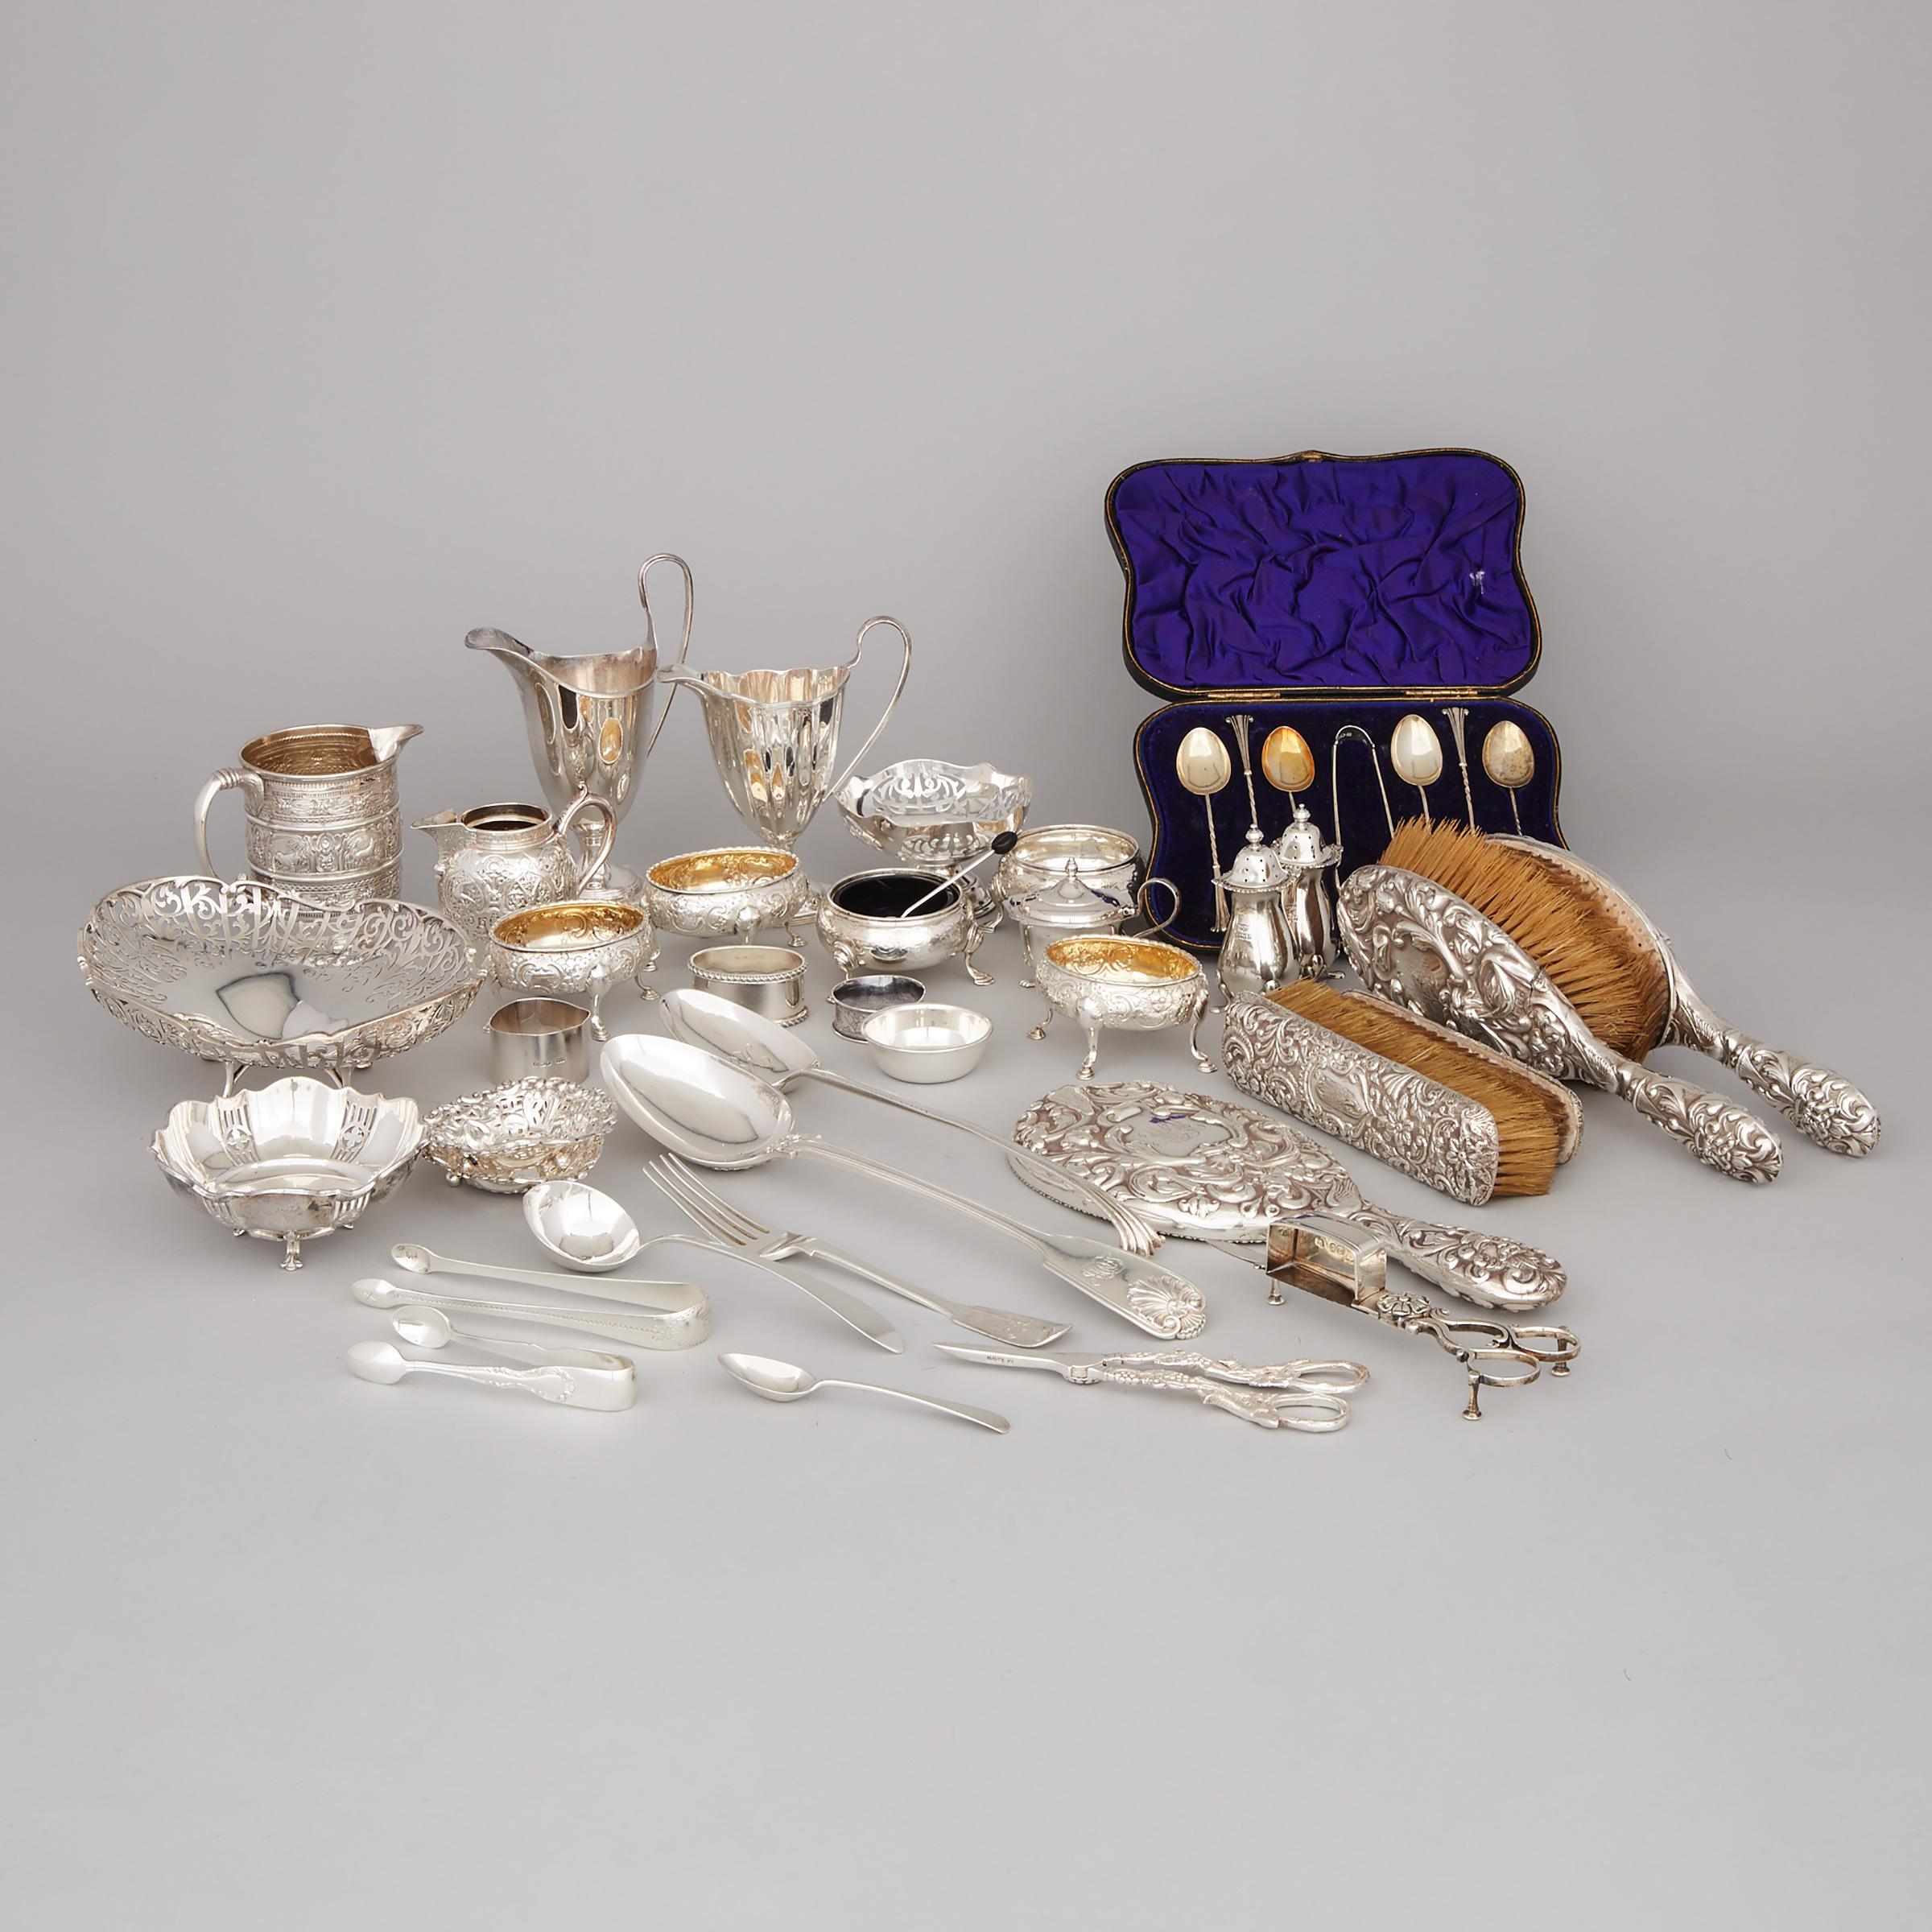 Group of Mainly Georgian and Later English Silver, 18th-20th century